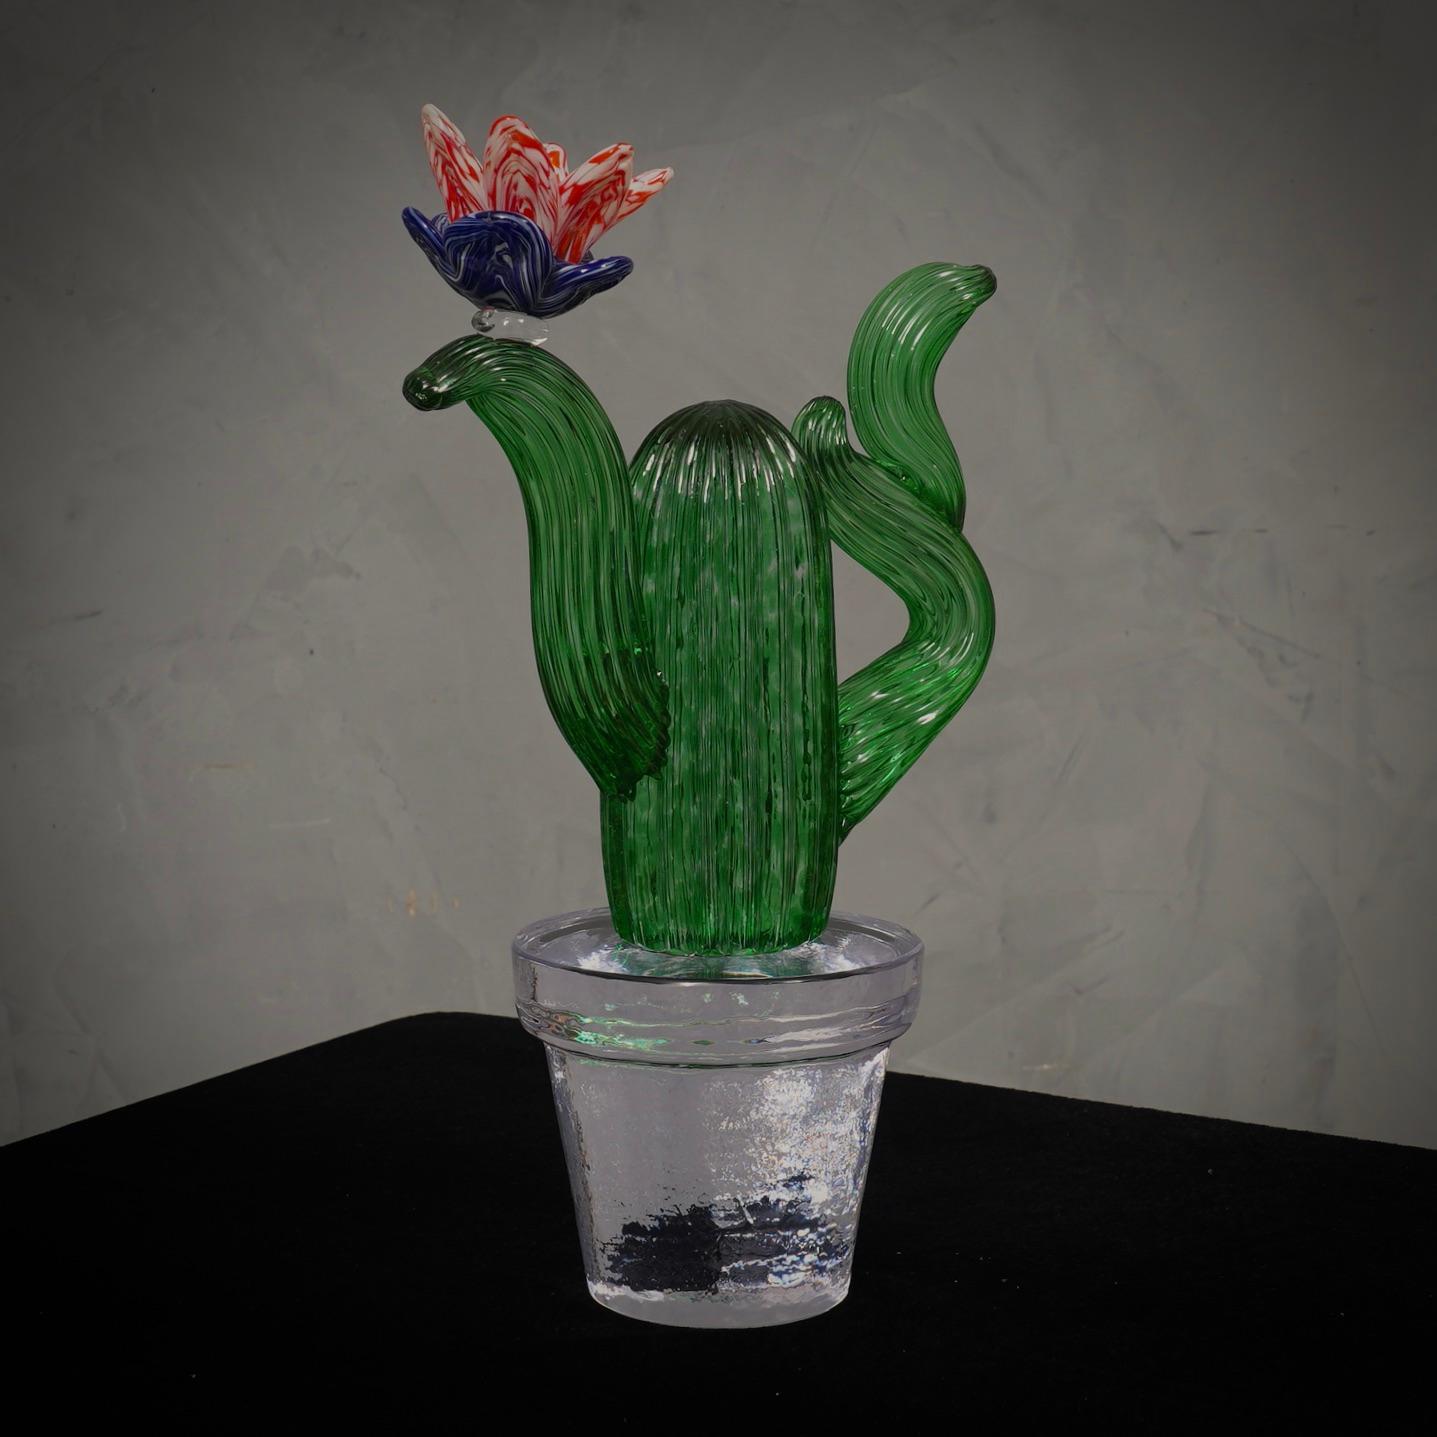 Italian design by Marta Marzotto creator of style, this cactus is a fashion icon of the Italian style, emerald green with a Red and blu colored spot, the flower. Refinement and class as in Marta Marzotto's style, one-of-a-kind pieces that always